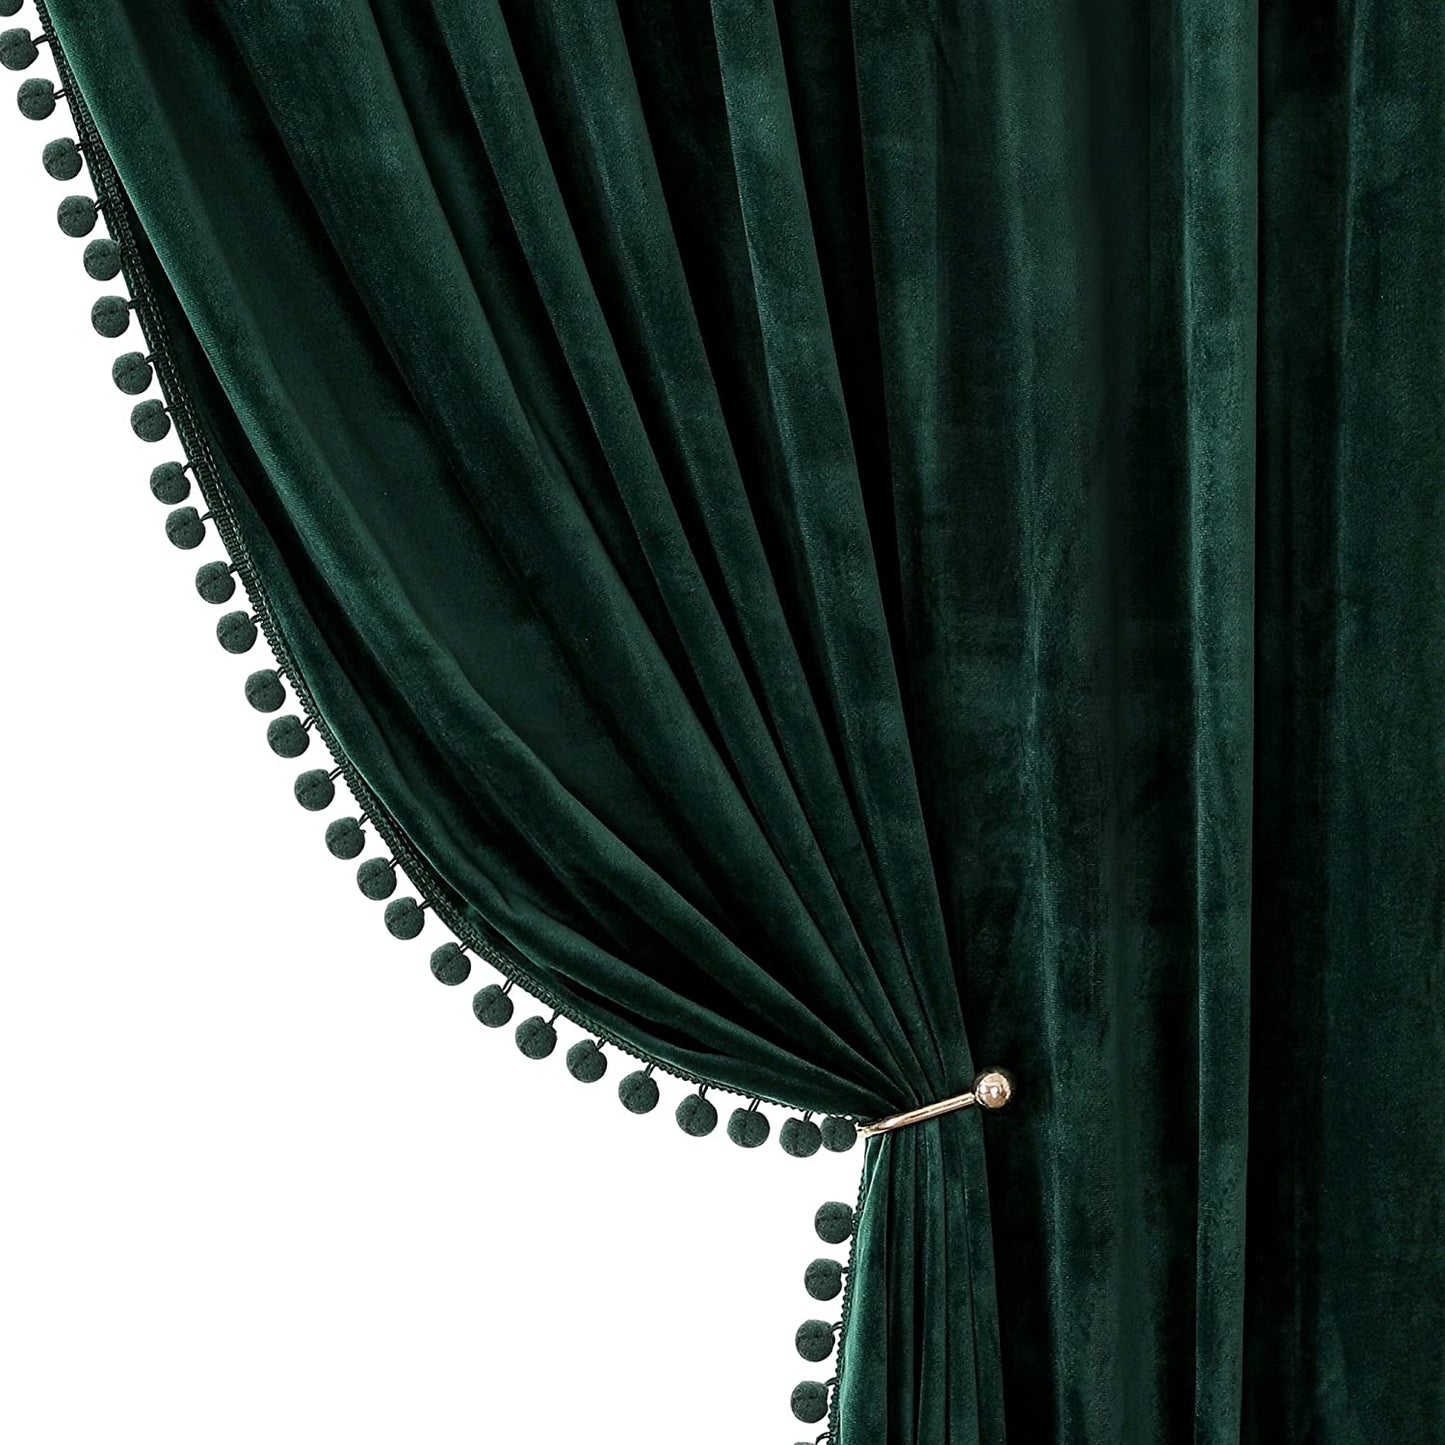 Benedeco Green Velvet Curtains for Bedroom Window, Super Soft Luxury Drapes, Room Darkening Thermal Insulated Rod Pocket Curtain for Living Room, W52 by L84 Inches, 2 Panels  Benedeco A-Green W52 * L108 | 2 Panels 